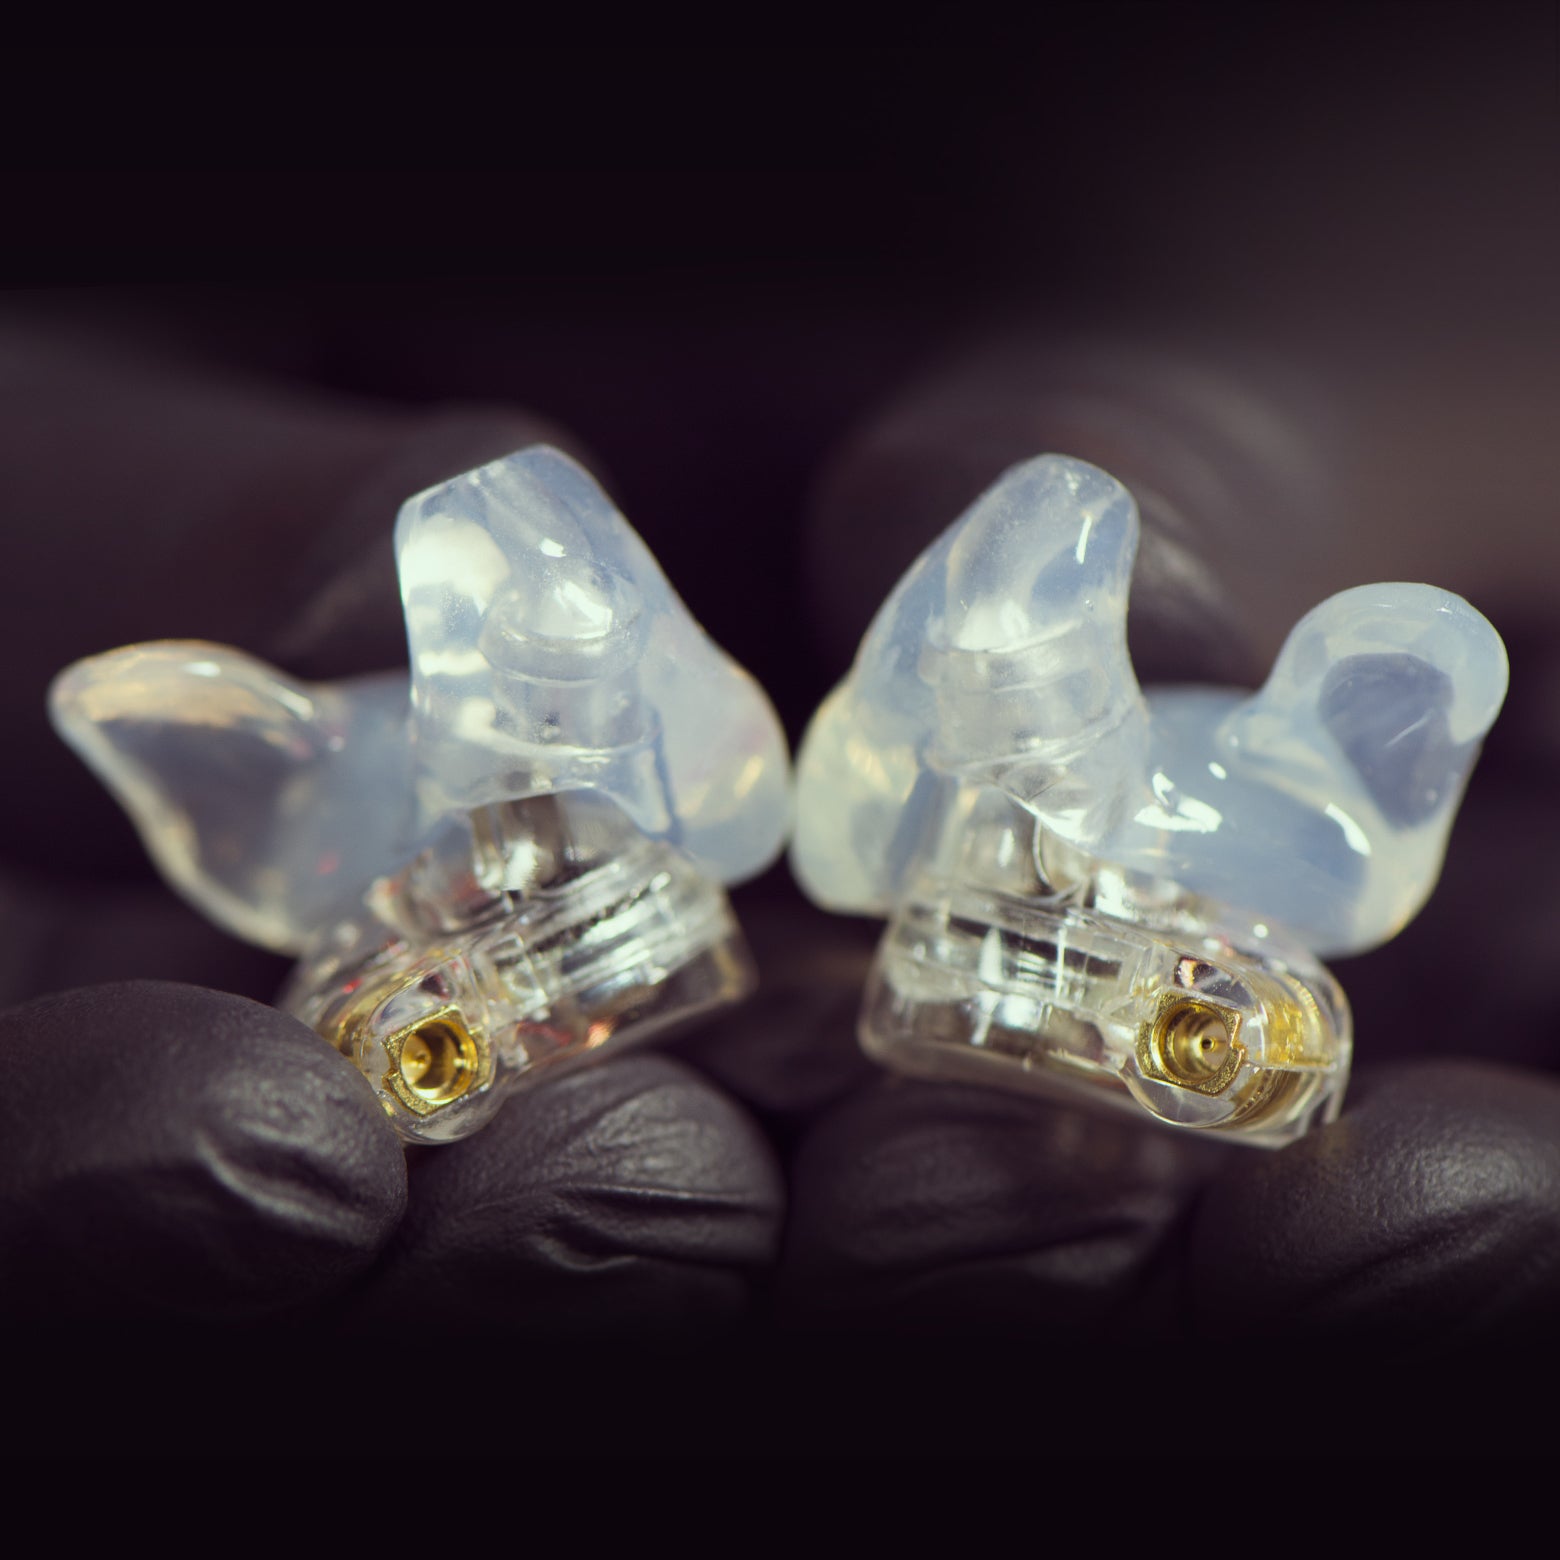 Two custom-molded, clear in-ear monitors held carefully between fingertips against a dark background, focusing on their detailed, translucent structure.